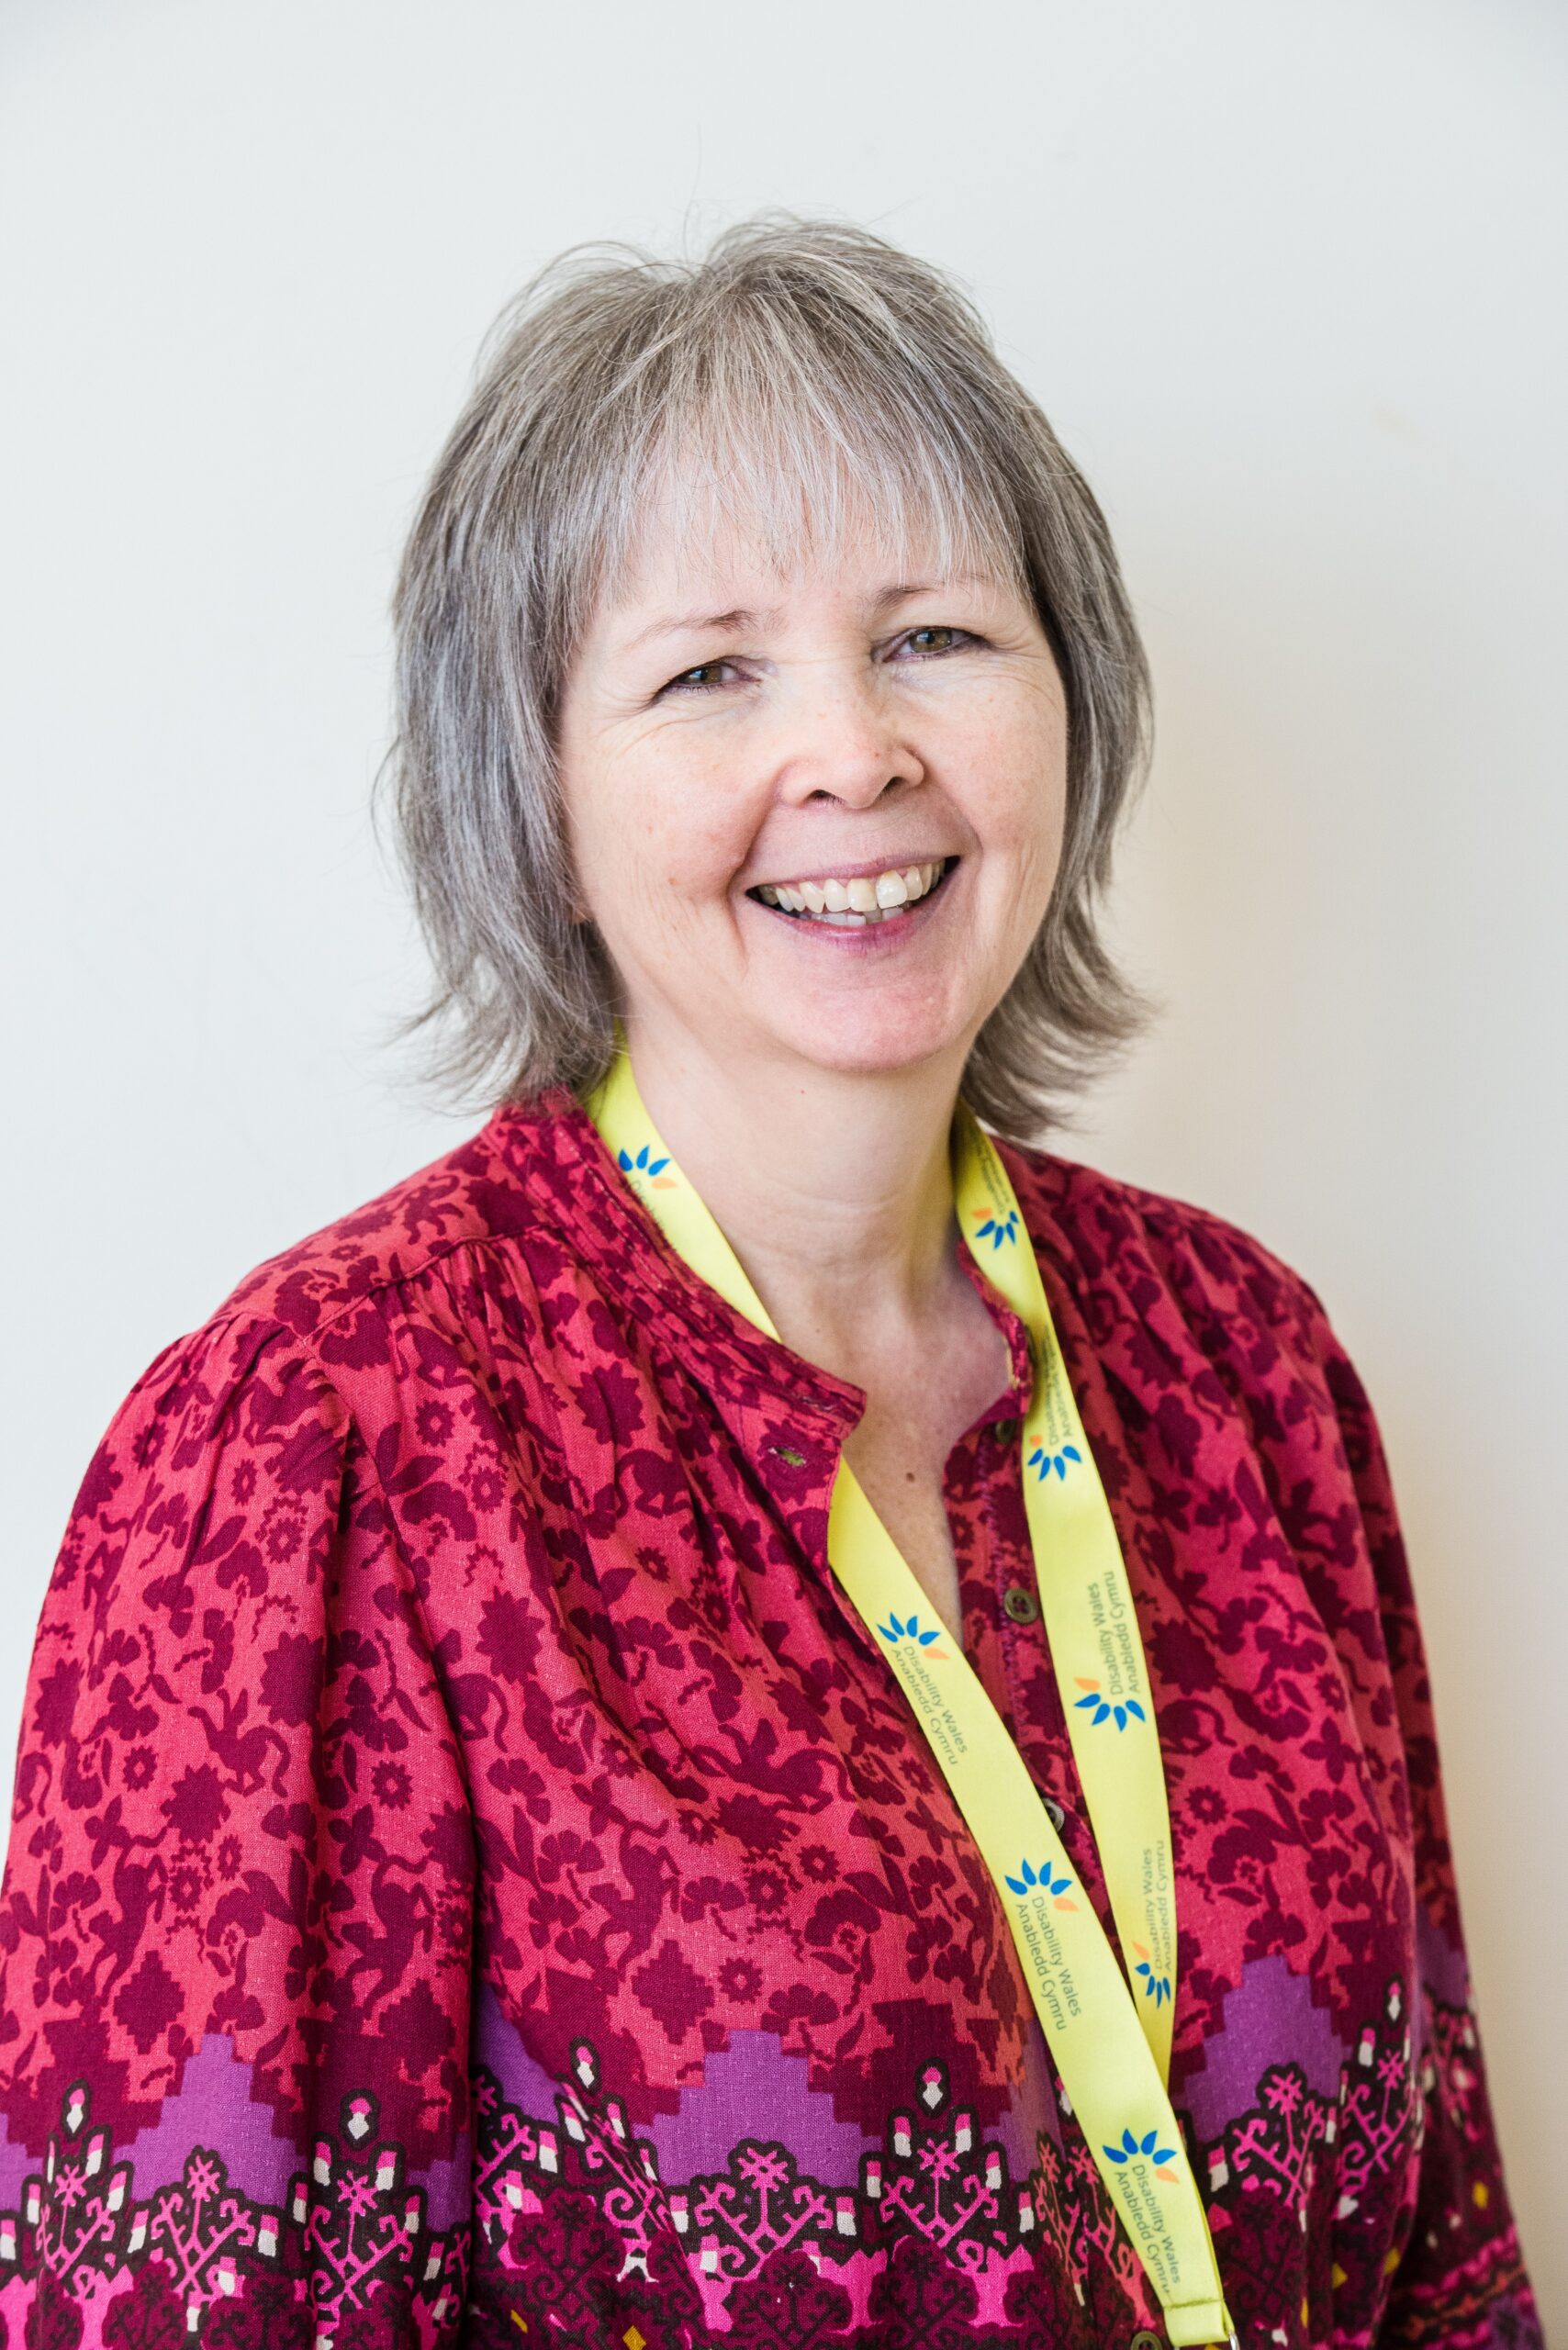 DW Chief Executive, Rhian Davies, standing in front of a white wall and smiling broadly at the camera. She has light short hair and is wearing a bright pink floral top. A Disability Wales lanyard hangs from her neck.